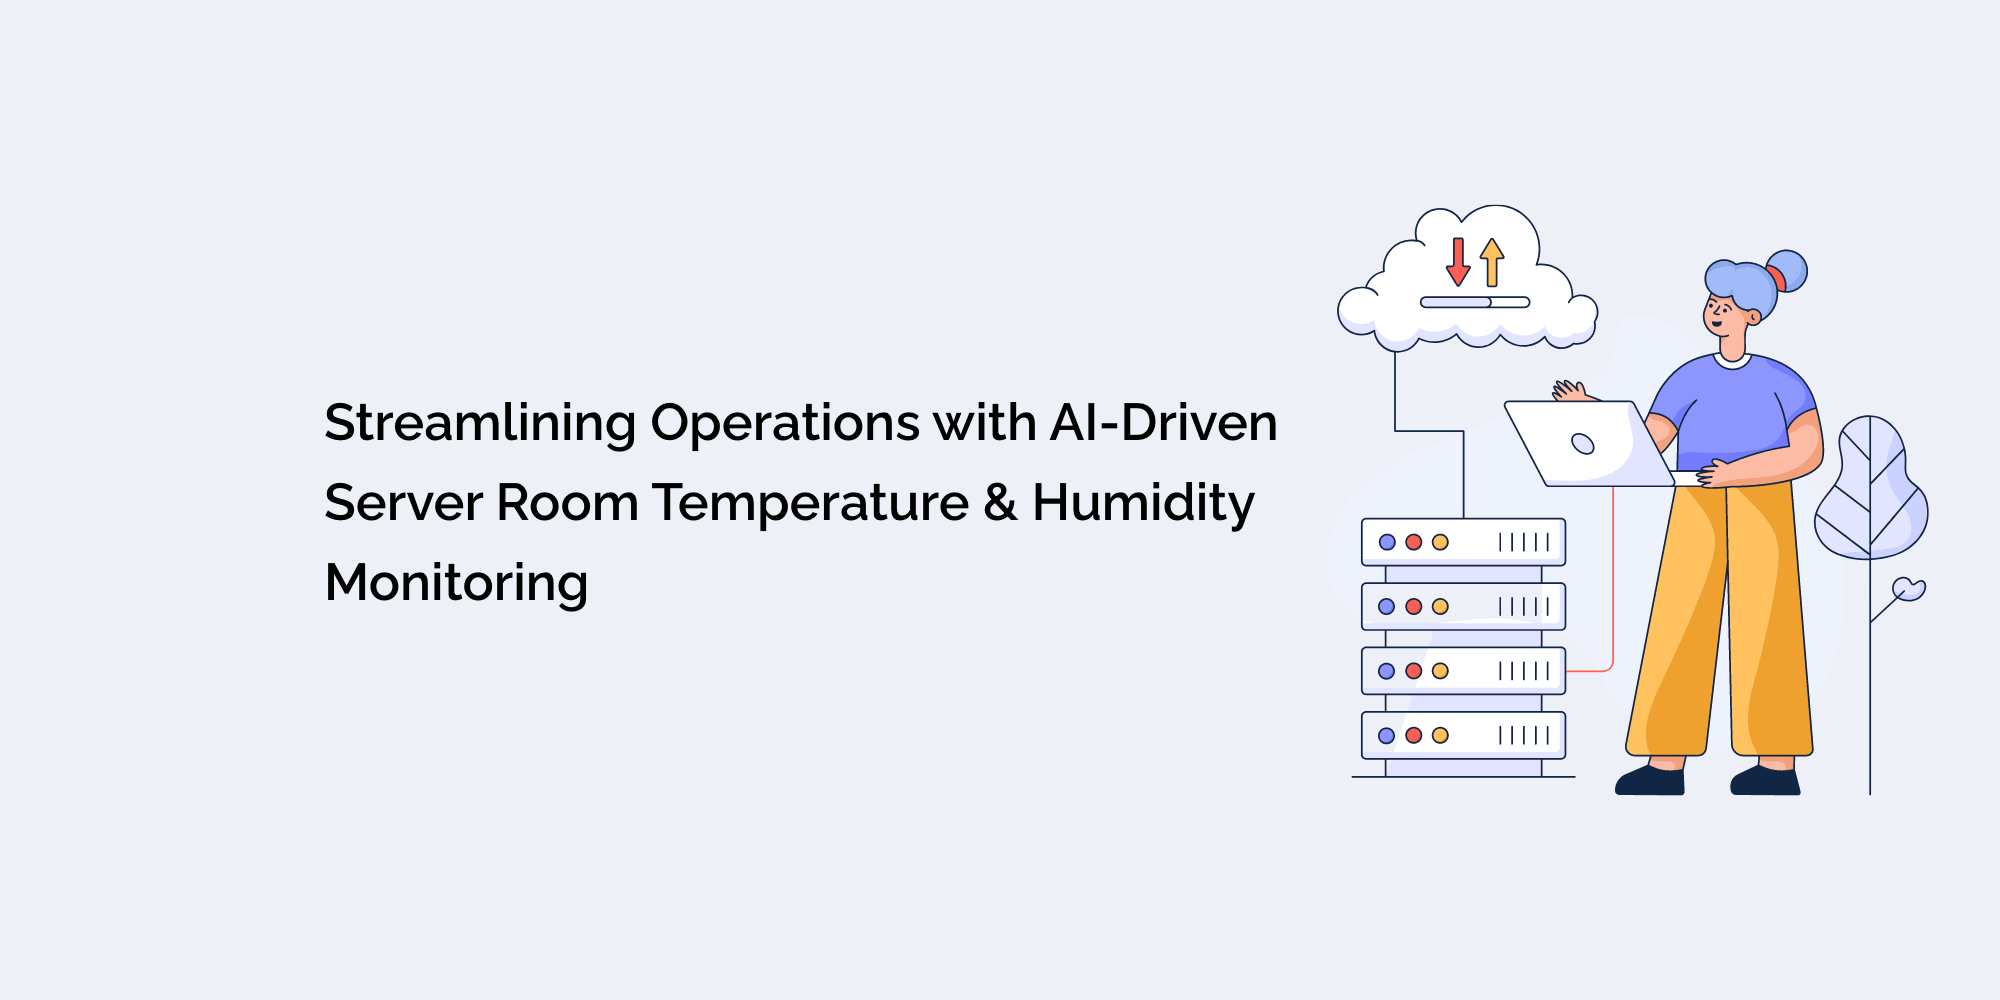 Streamlining Operations with AI-Driven Server Room Temperature and Humidity Monitoring